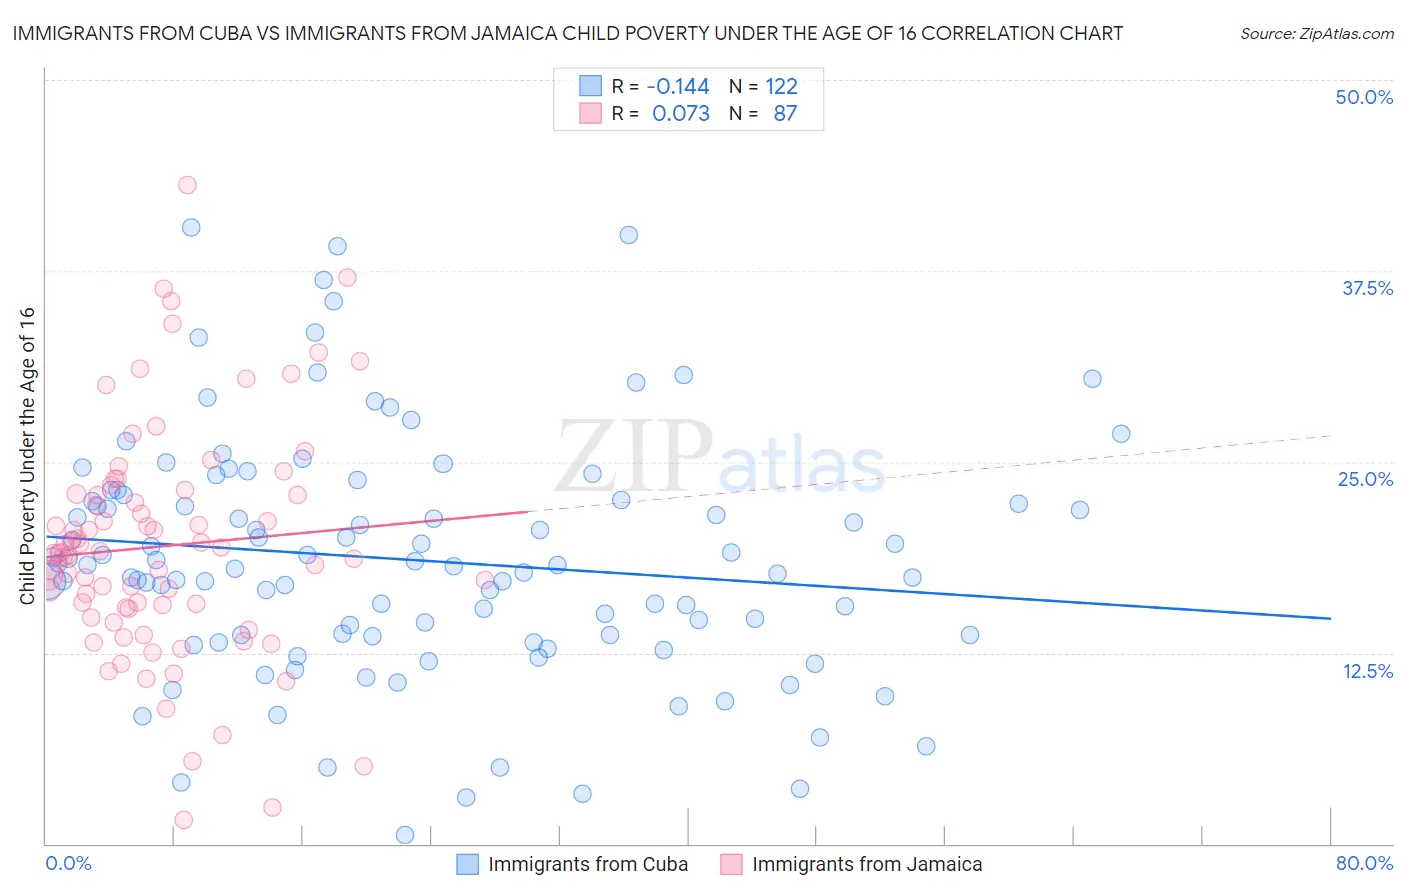 Immigrants from Cuba vs Immigrants from Jamaica Child Poverty Under the Age of 16